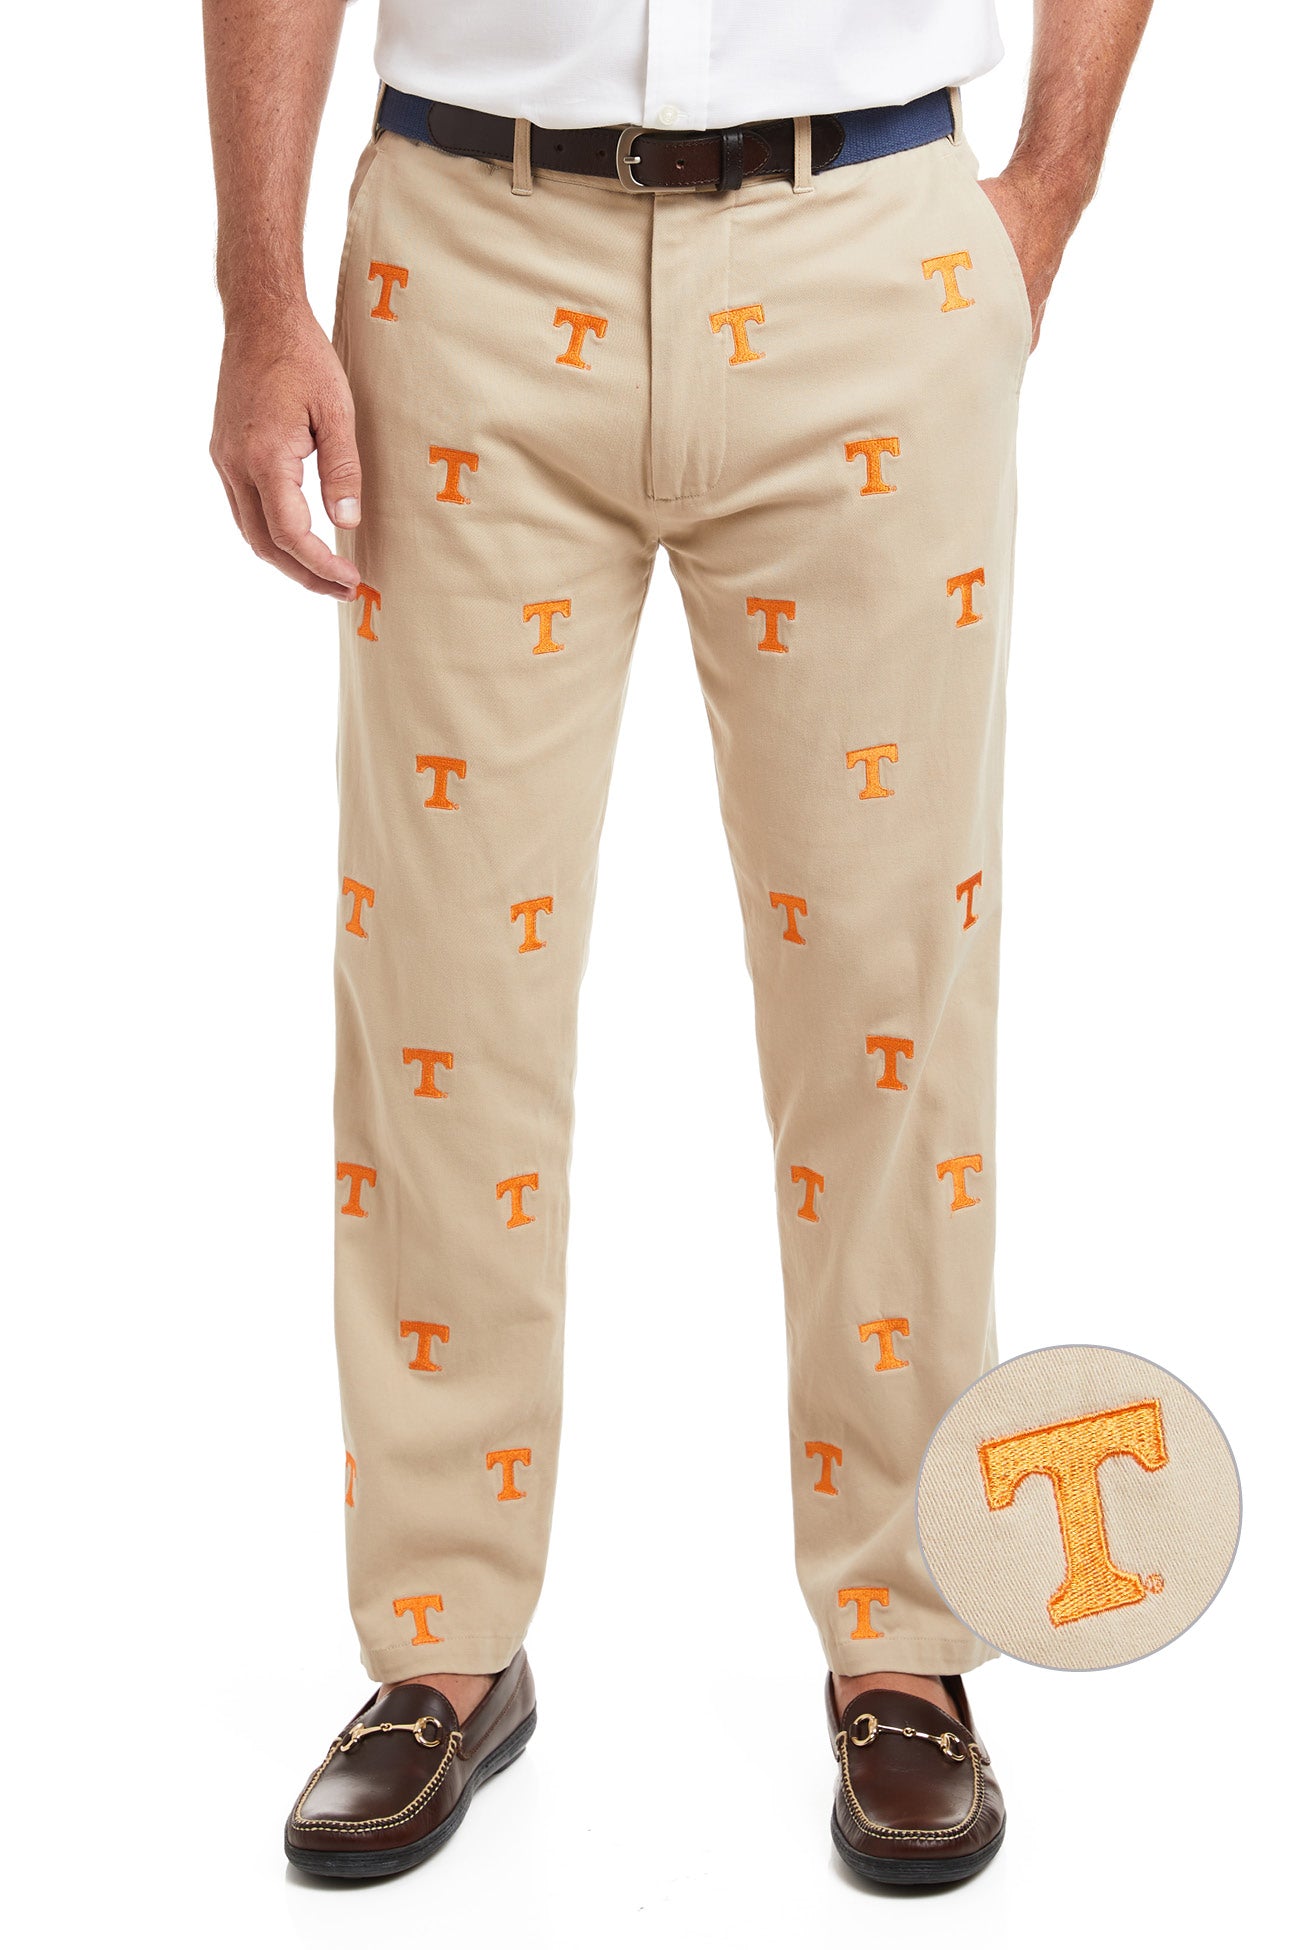 Collegiate Stretch Twill Pant Khaki with Tennessee MENS EMBROIDERED PANTS Castaway Nantucket Island